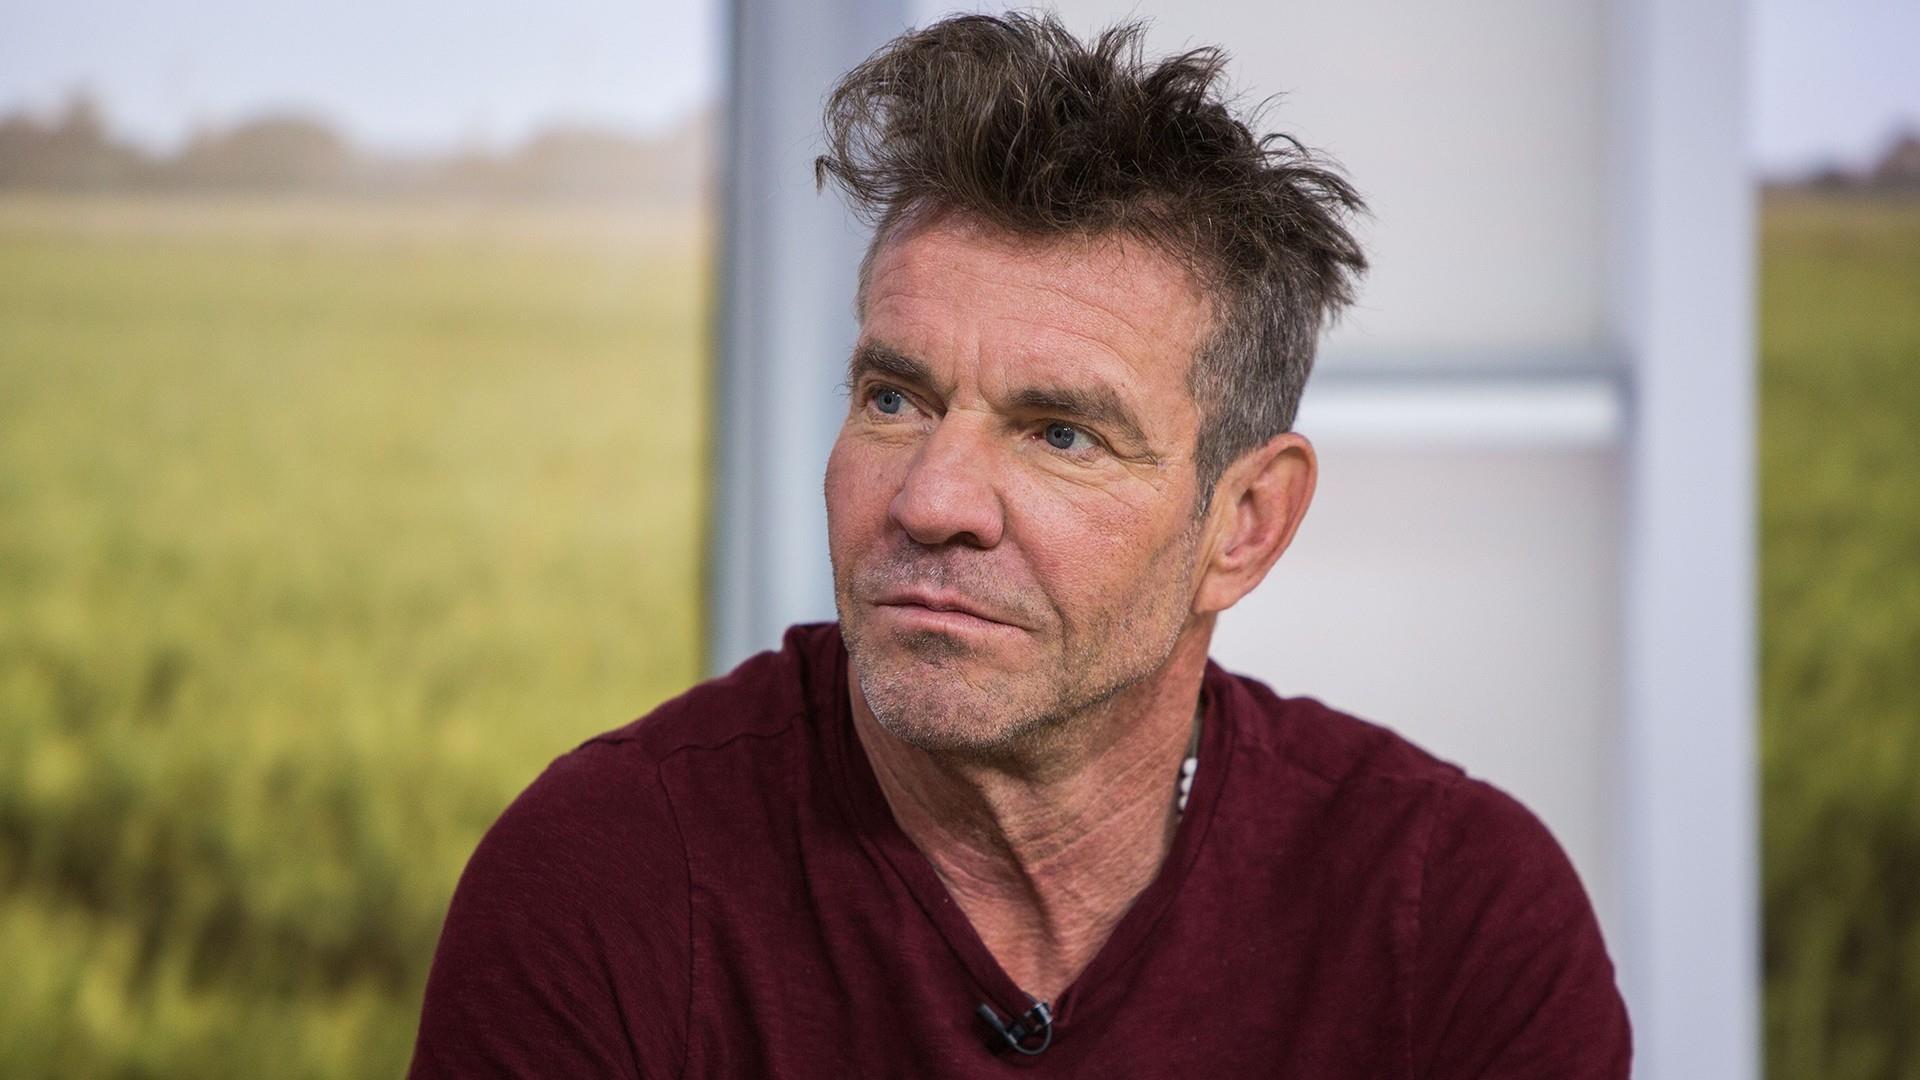 Dennis Quaid talks about his inspirational new film, 'I Can Only